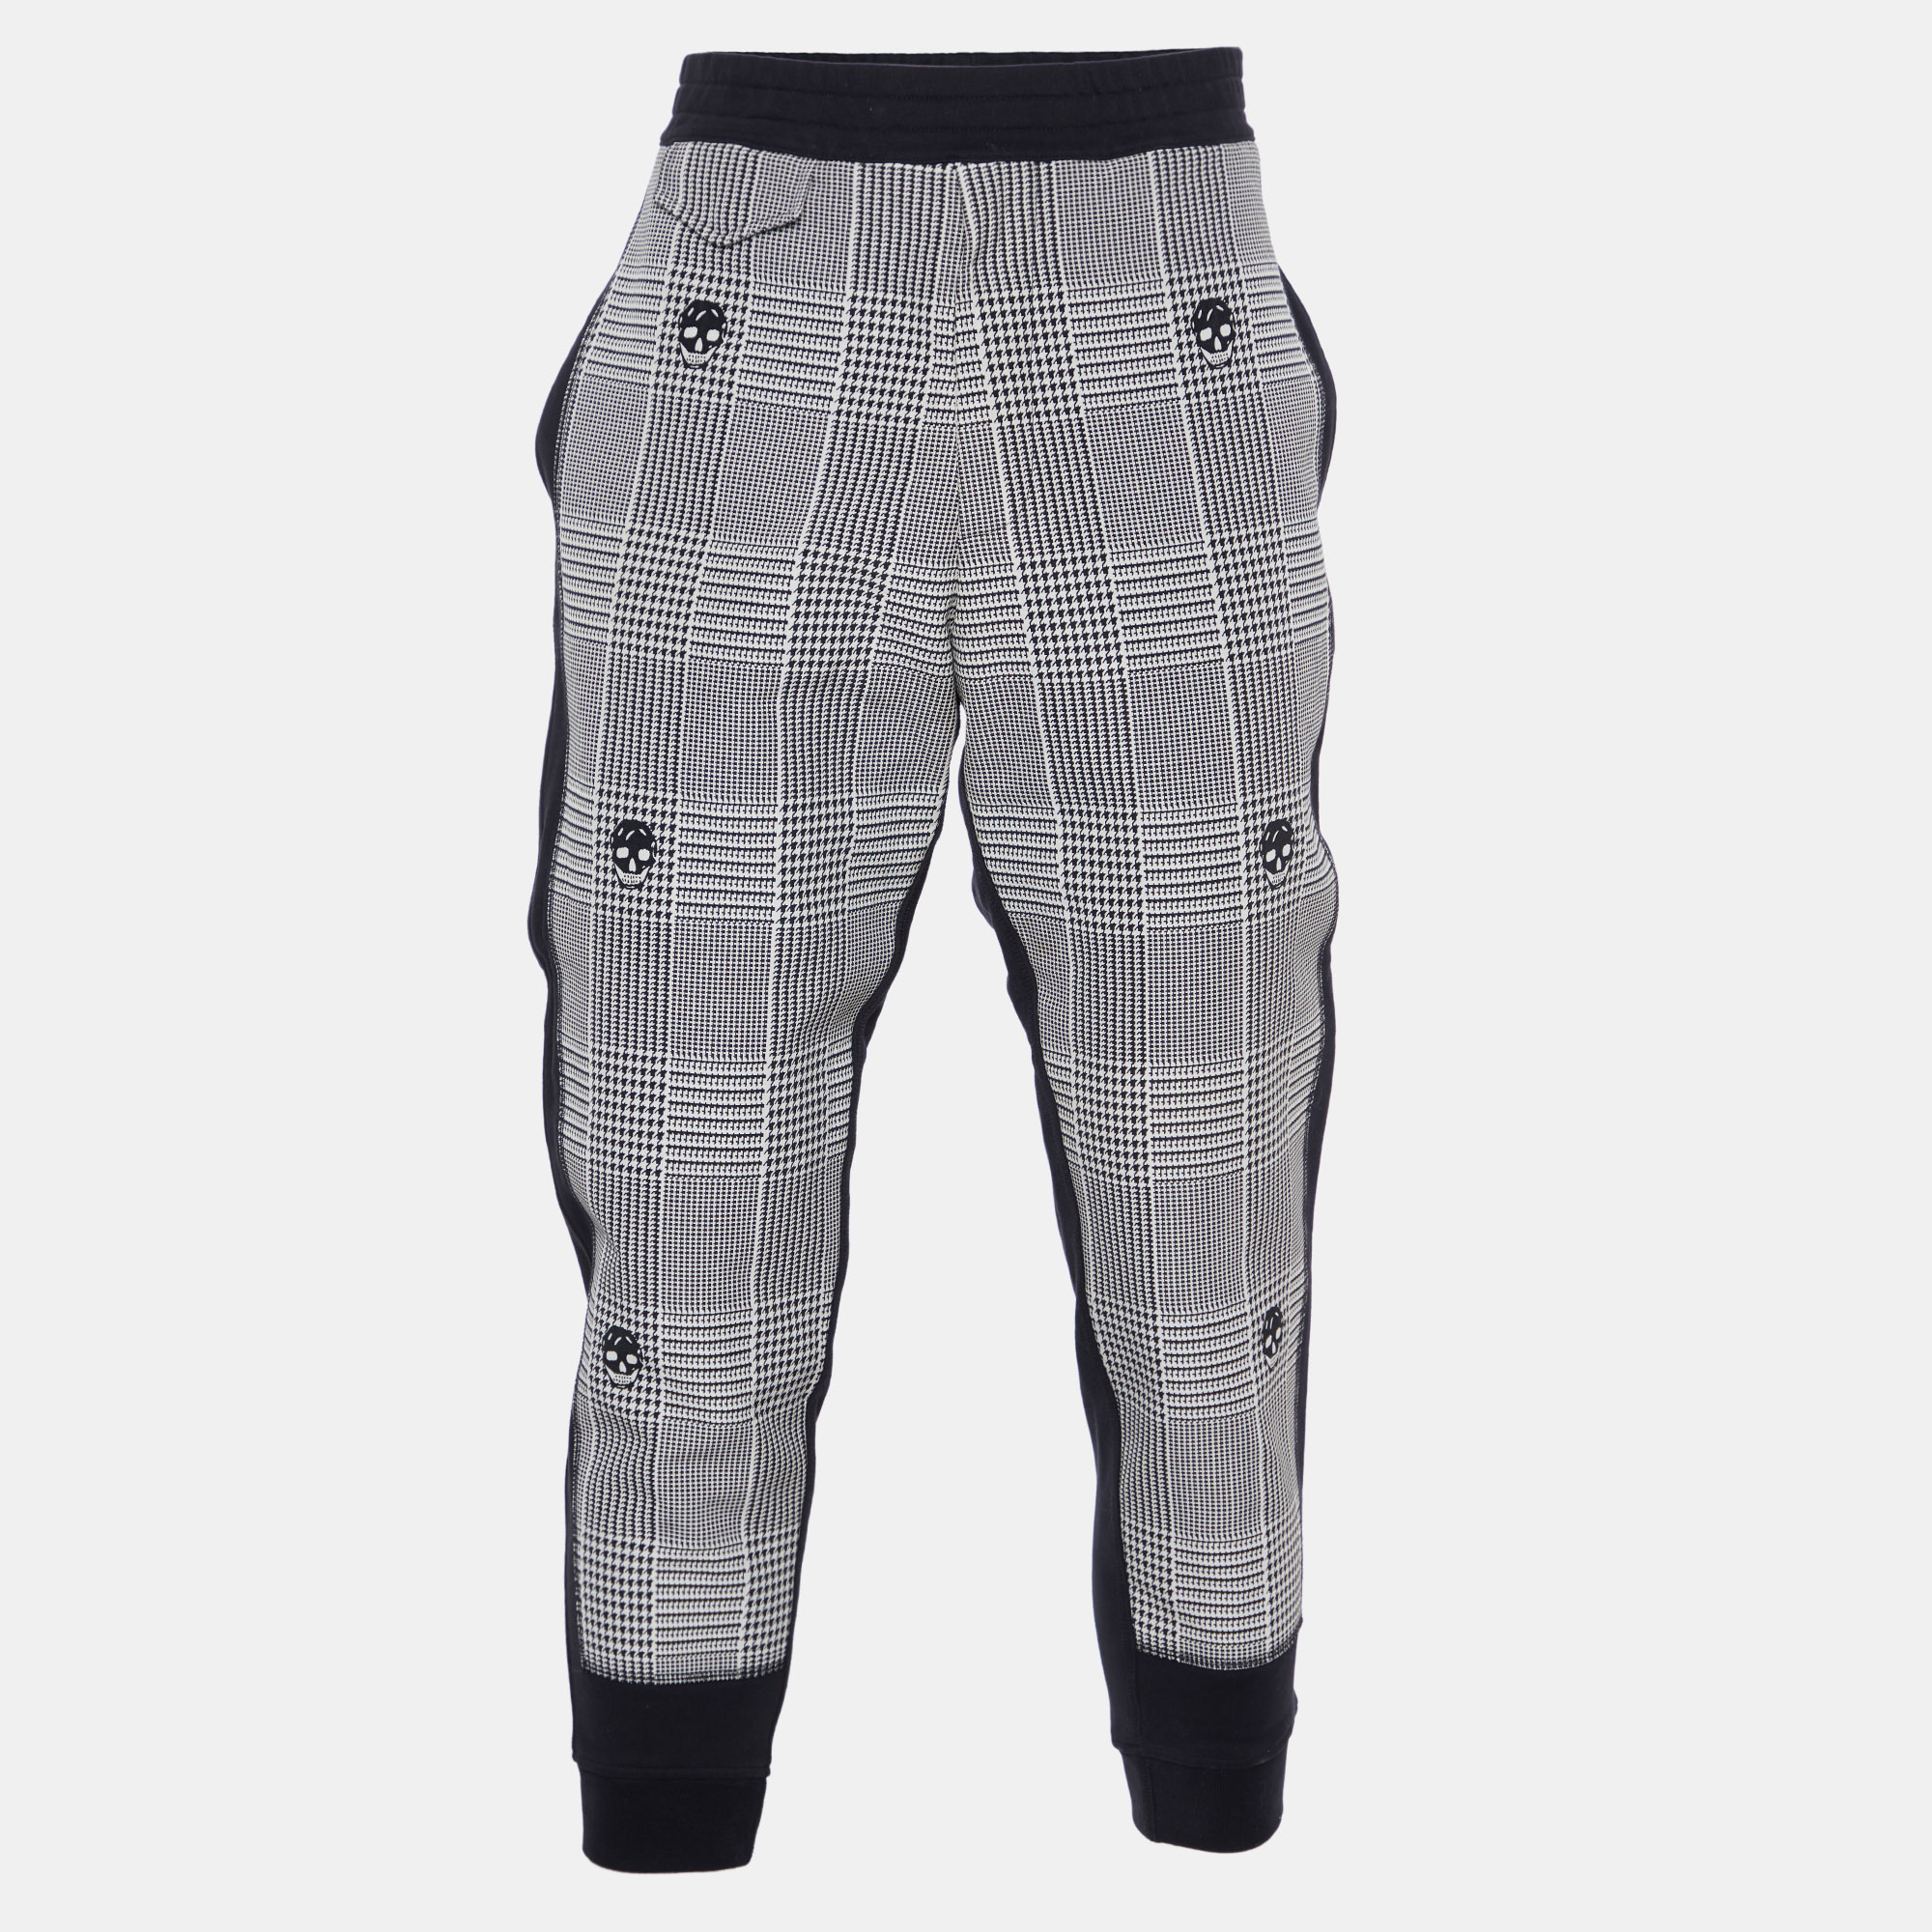 Alexander mcqueen black/white patterned cotton trackpants l